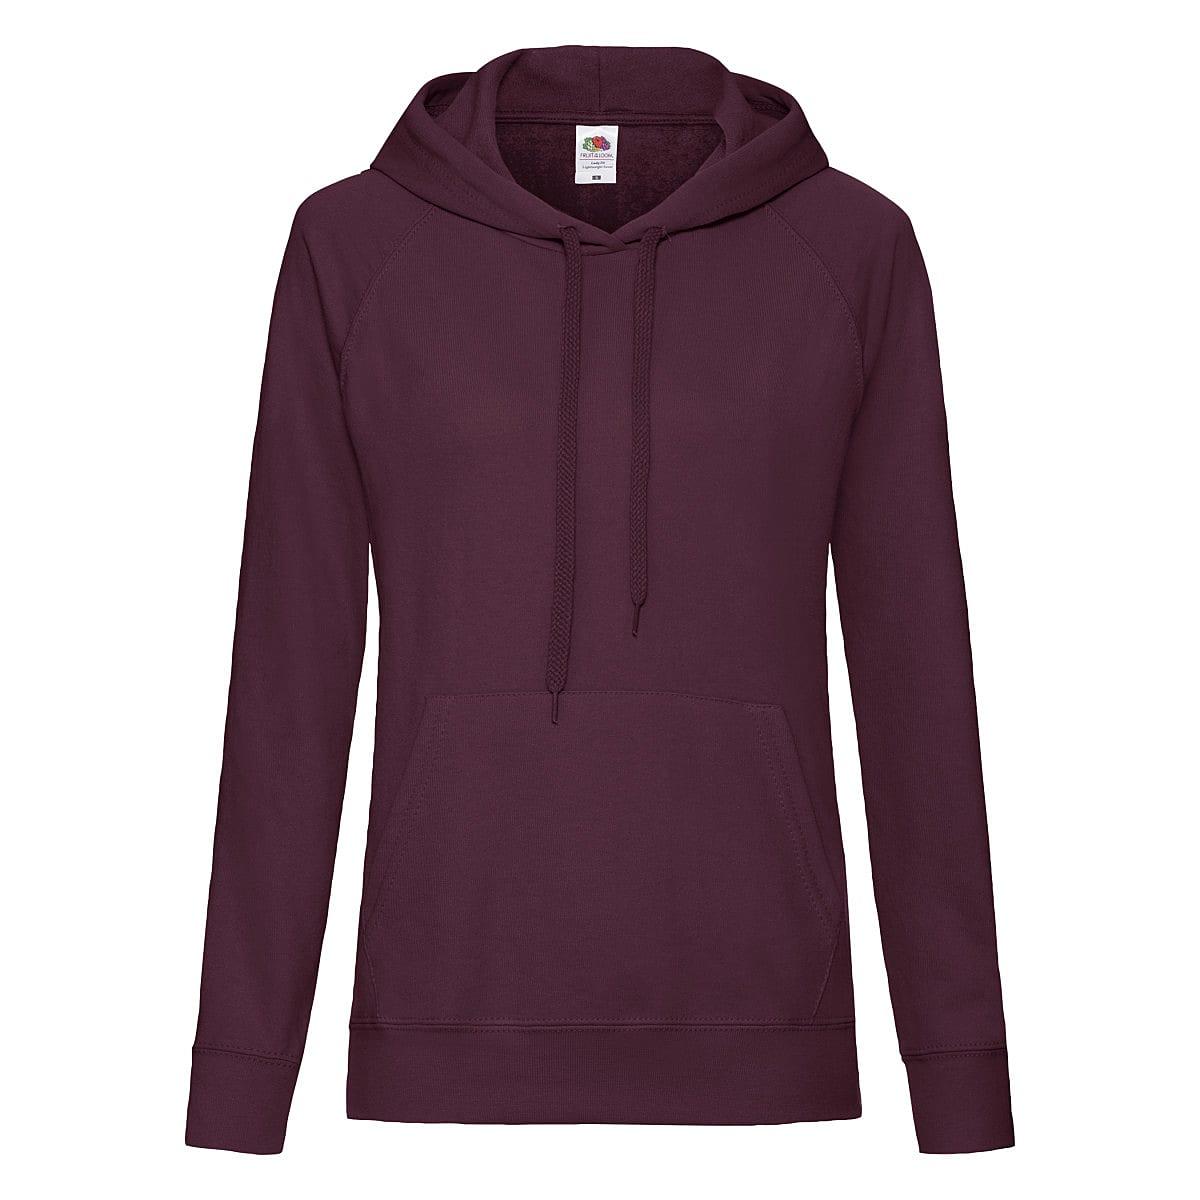 Fruit Of The Loom Lady-Fit Lightweight Hoodie in Burgundy (Product Code: 62148)